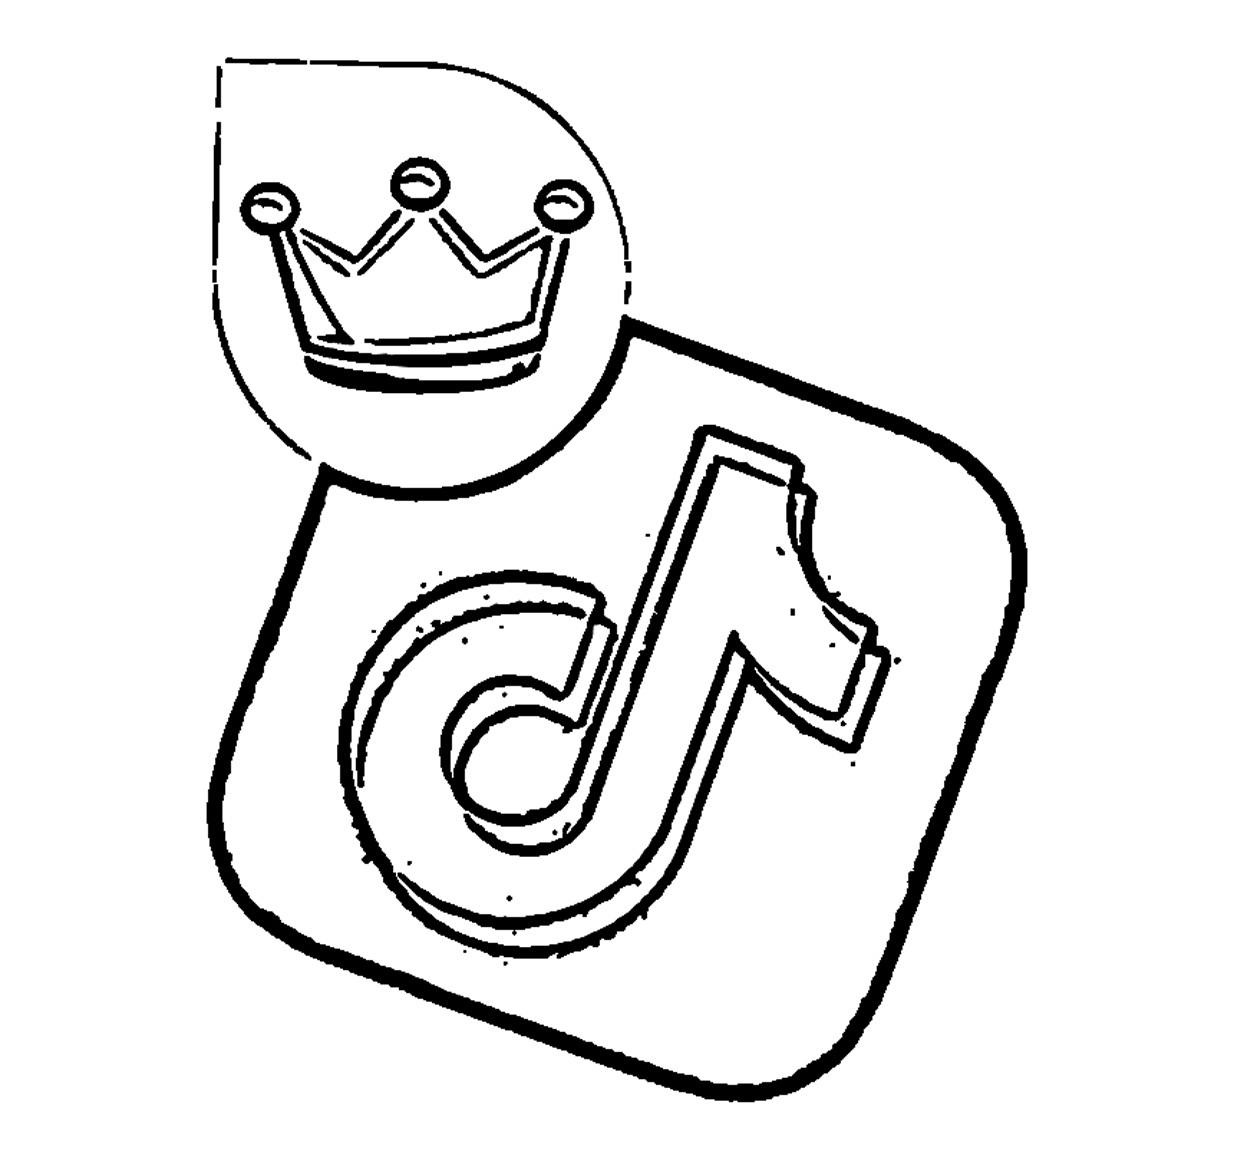 Tiktok Coloring Pages Free Printable 4 Tiktok Coloring Pages